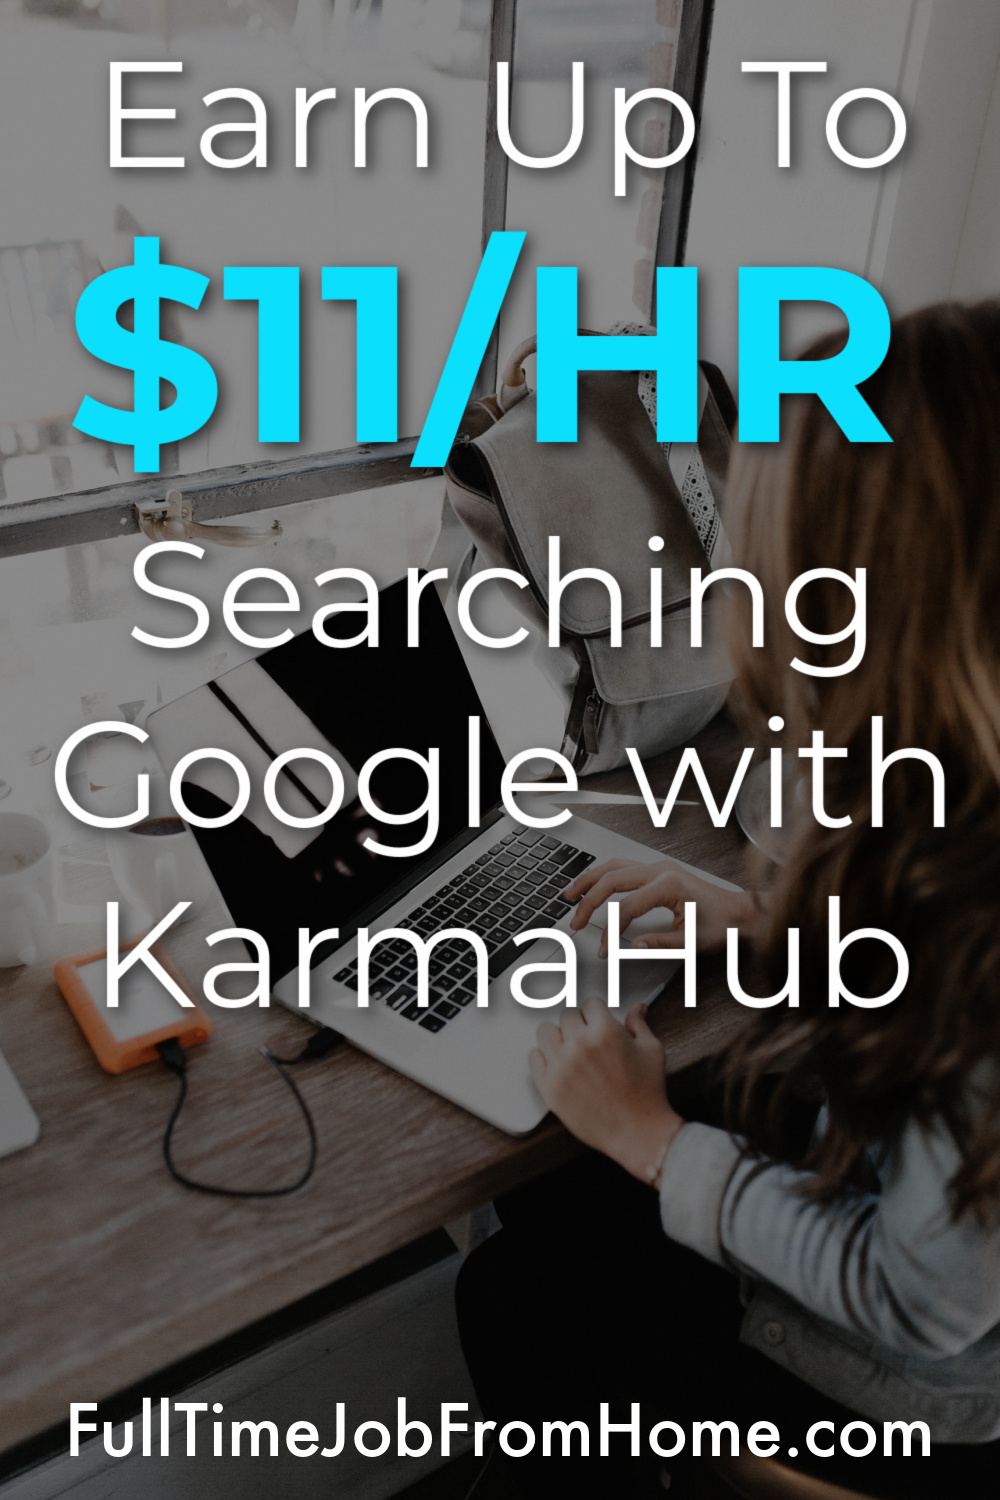 Learn How YOU Can Work From Home as a Search Engine Analyst and get paid up to $11/HR to search on Google at KarmaHub 